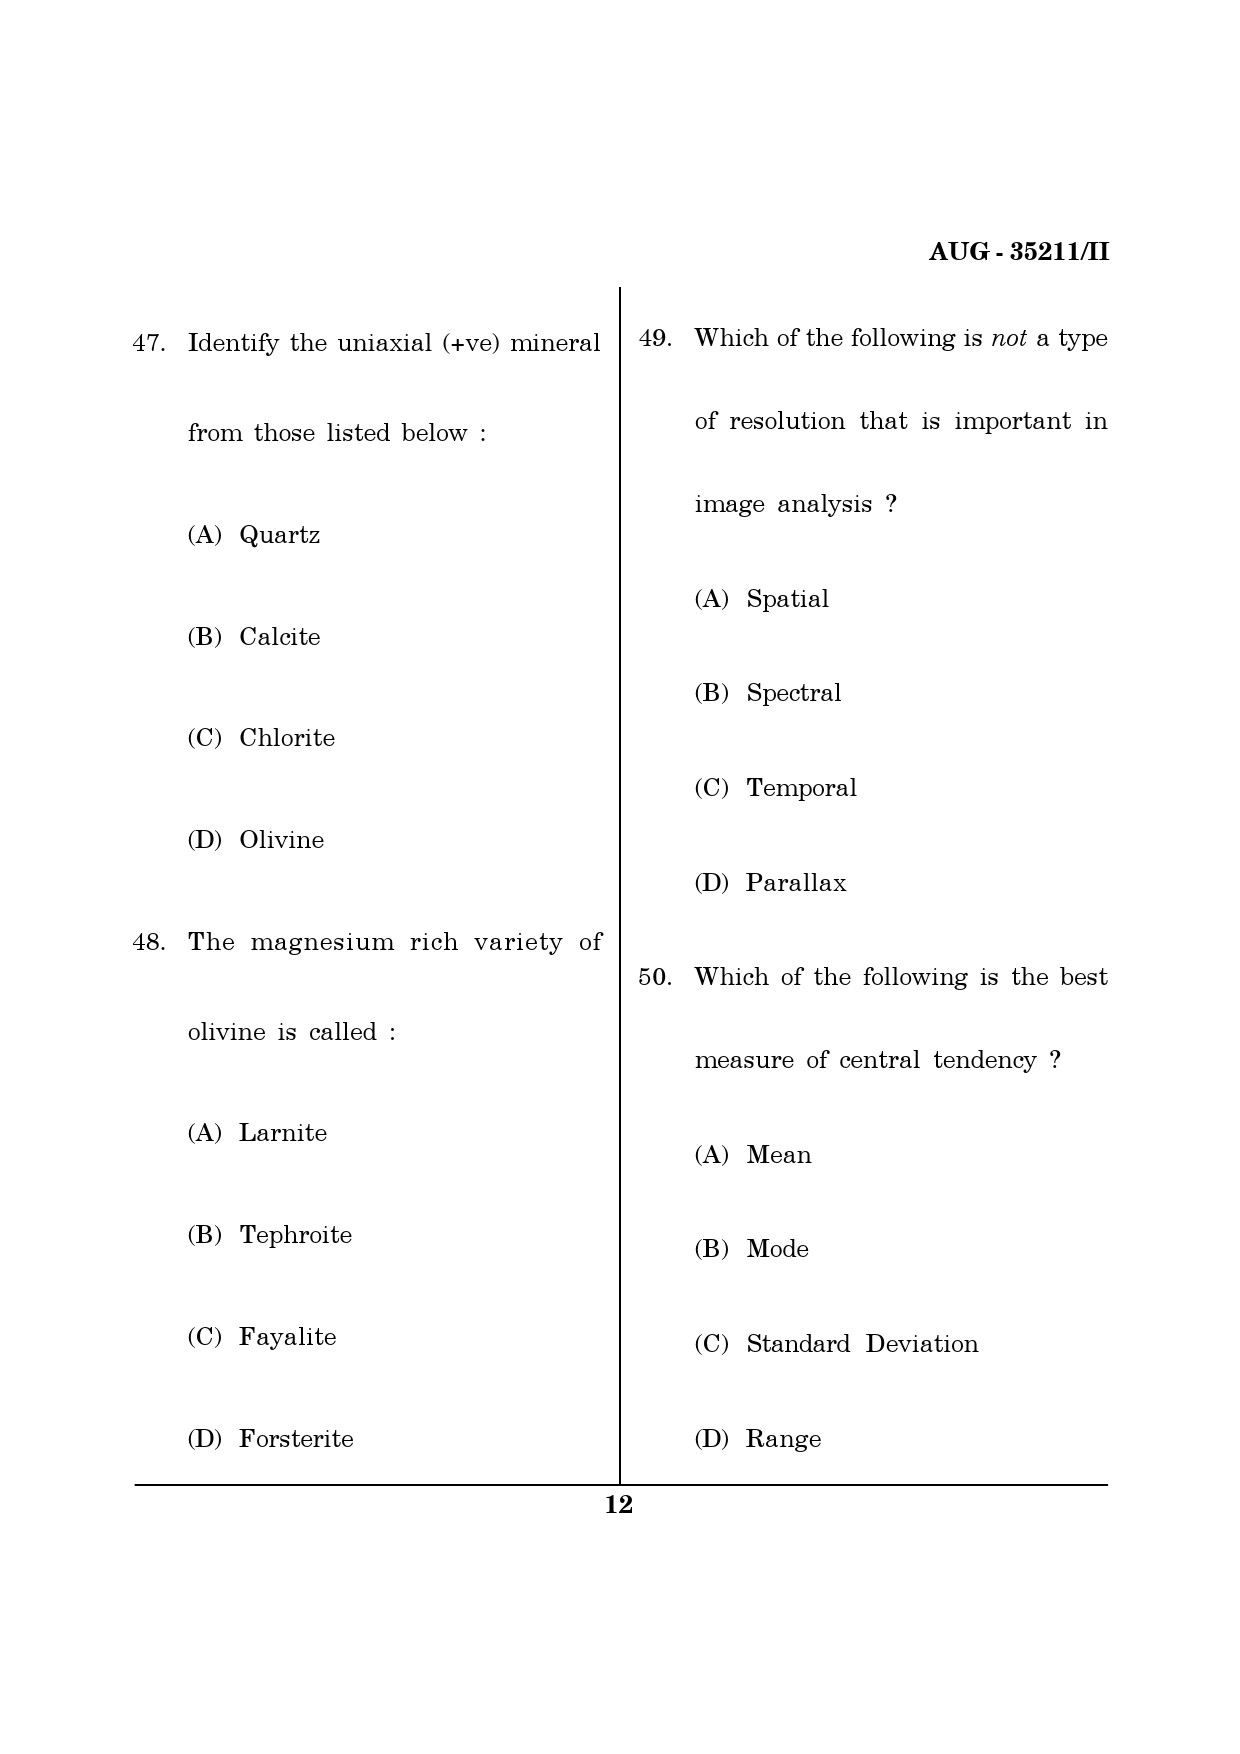 Maharashtra SET Earth Atmospheric Ocean Planetary Science Question Paper II August 2011 12